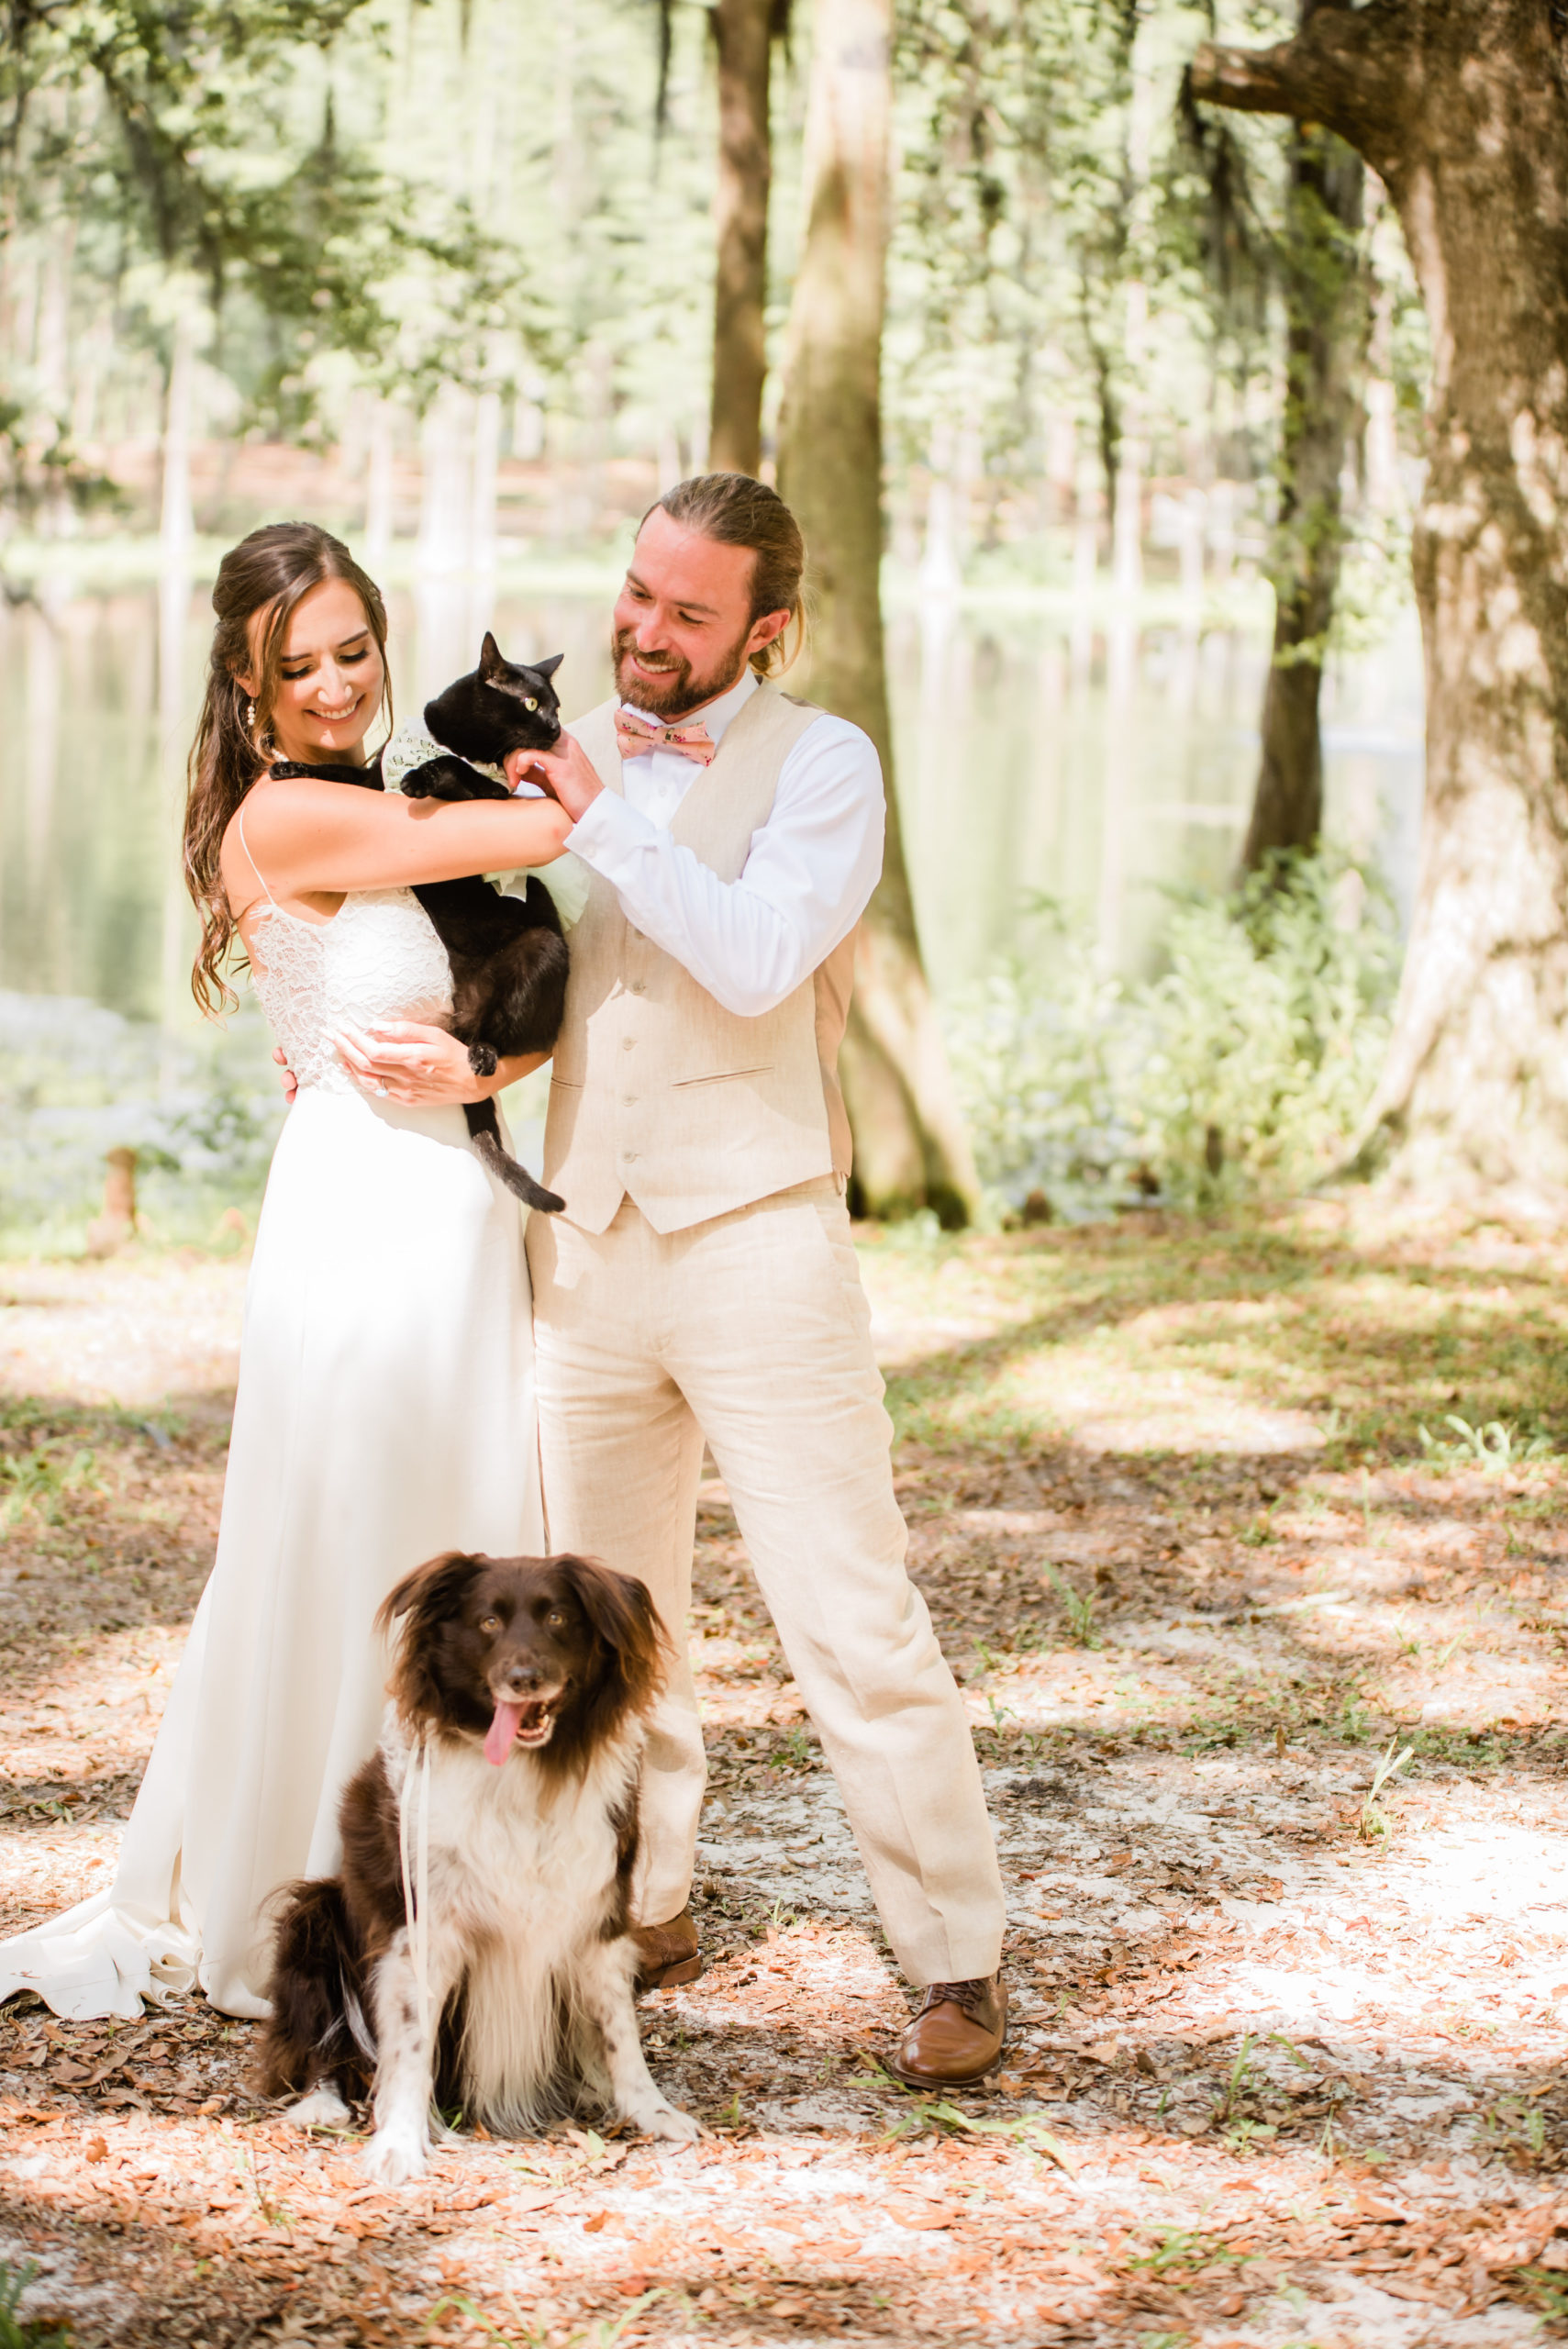 Bride and Groom photos at Spirit of the Suwannee wedding, Live Oak Florida, Black Tie and Co.